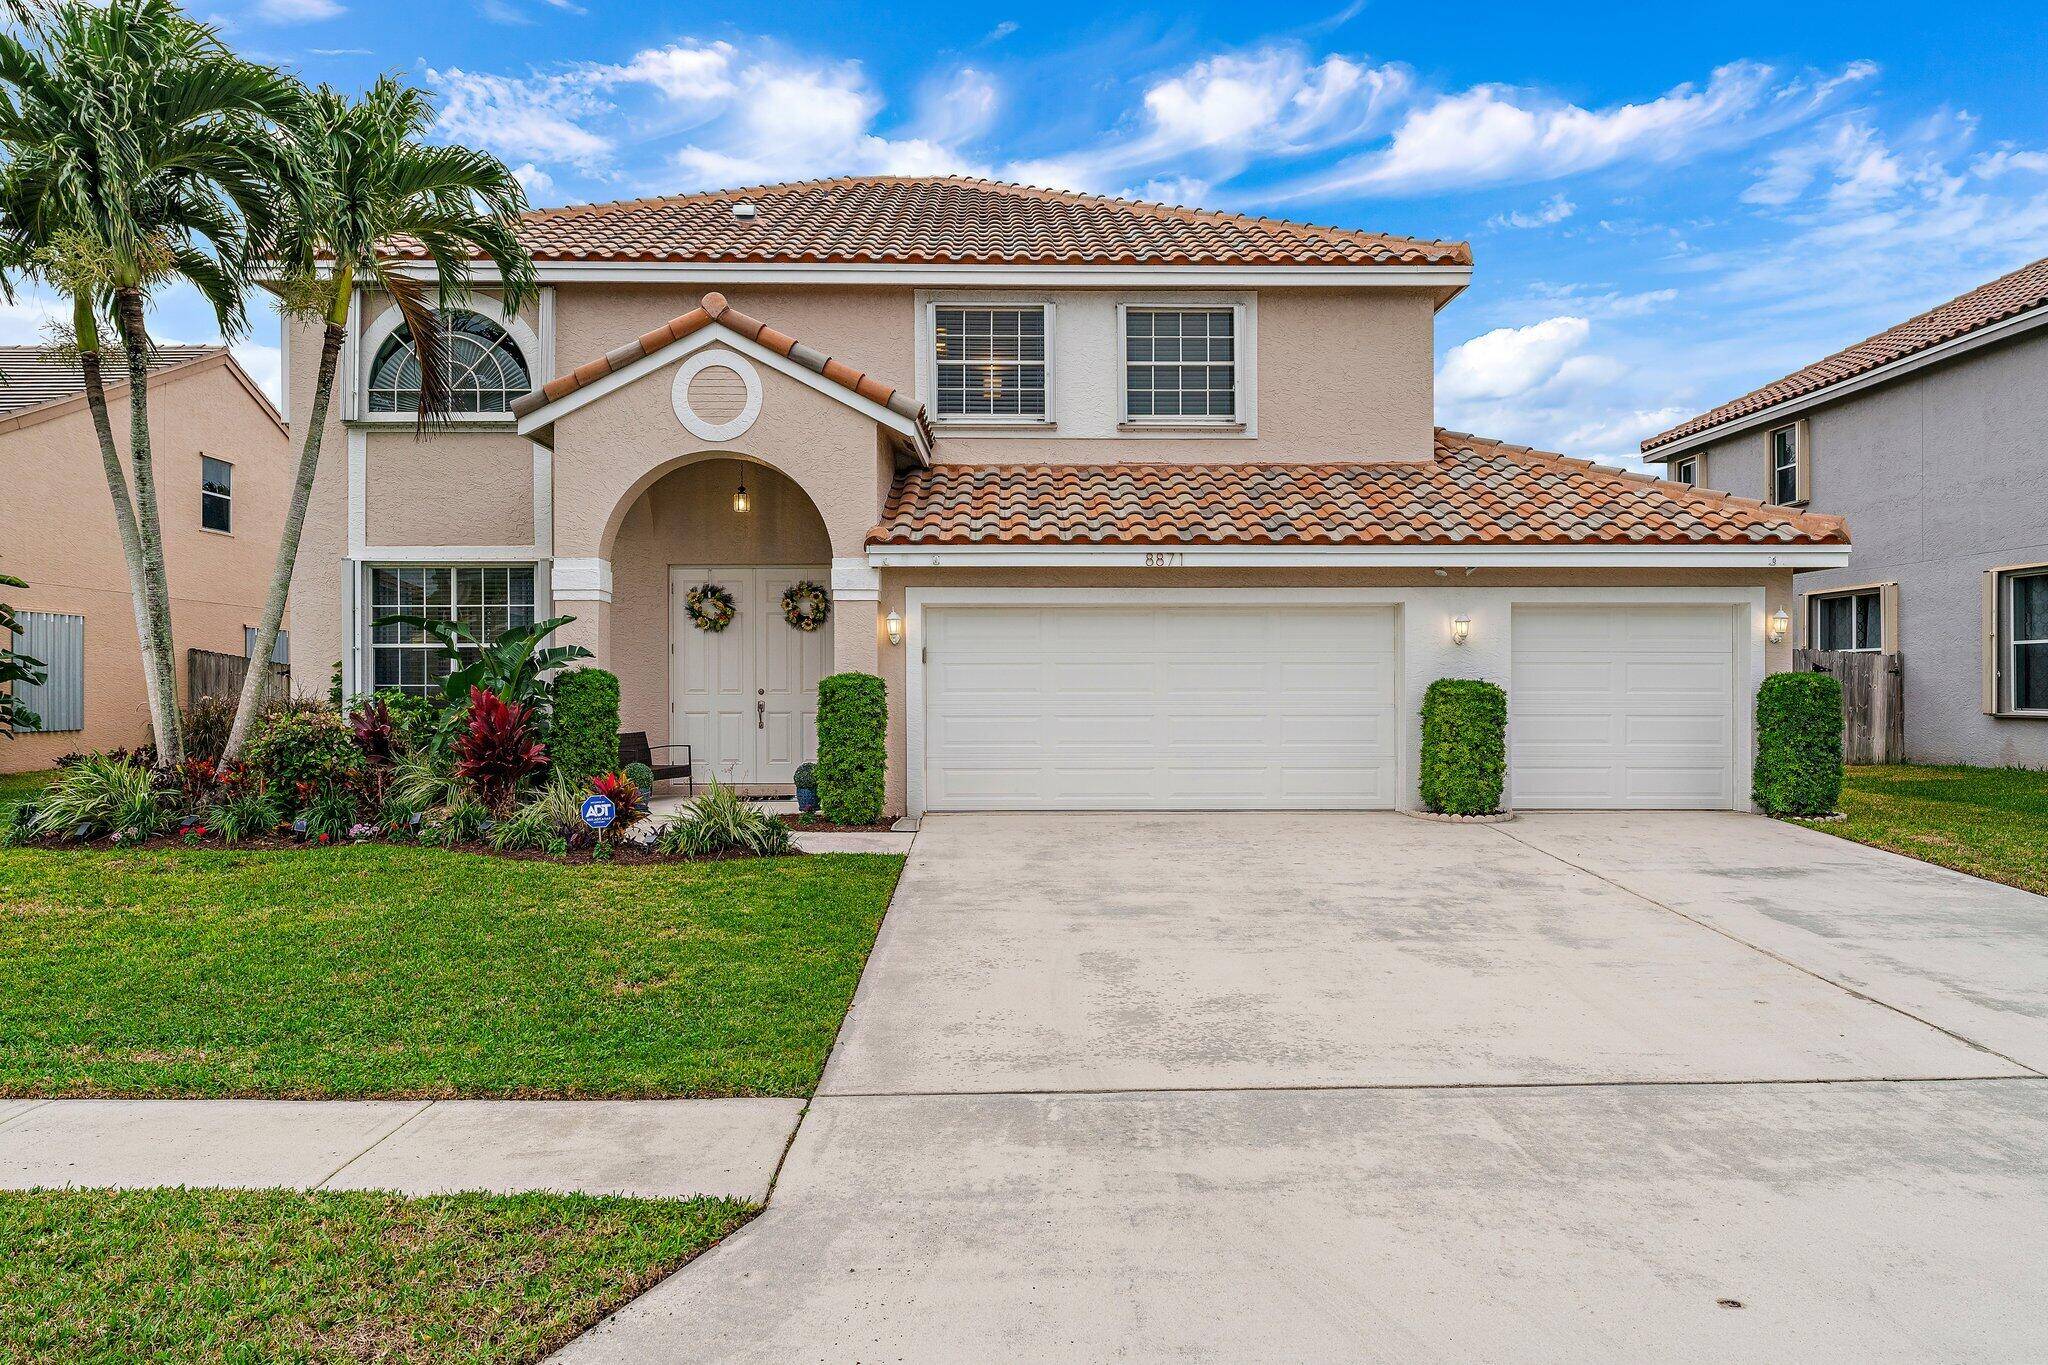 Behold this marvelous Monaco model in the coveted Le Palais neighborhood of Boynton Beach !